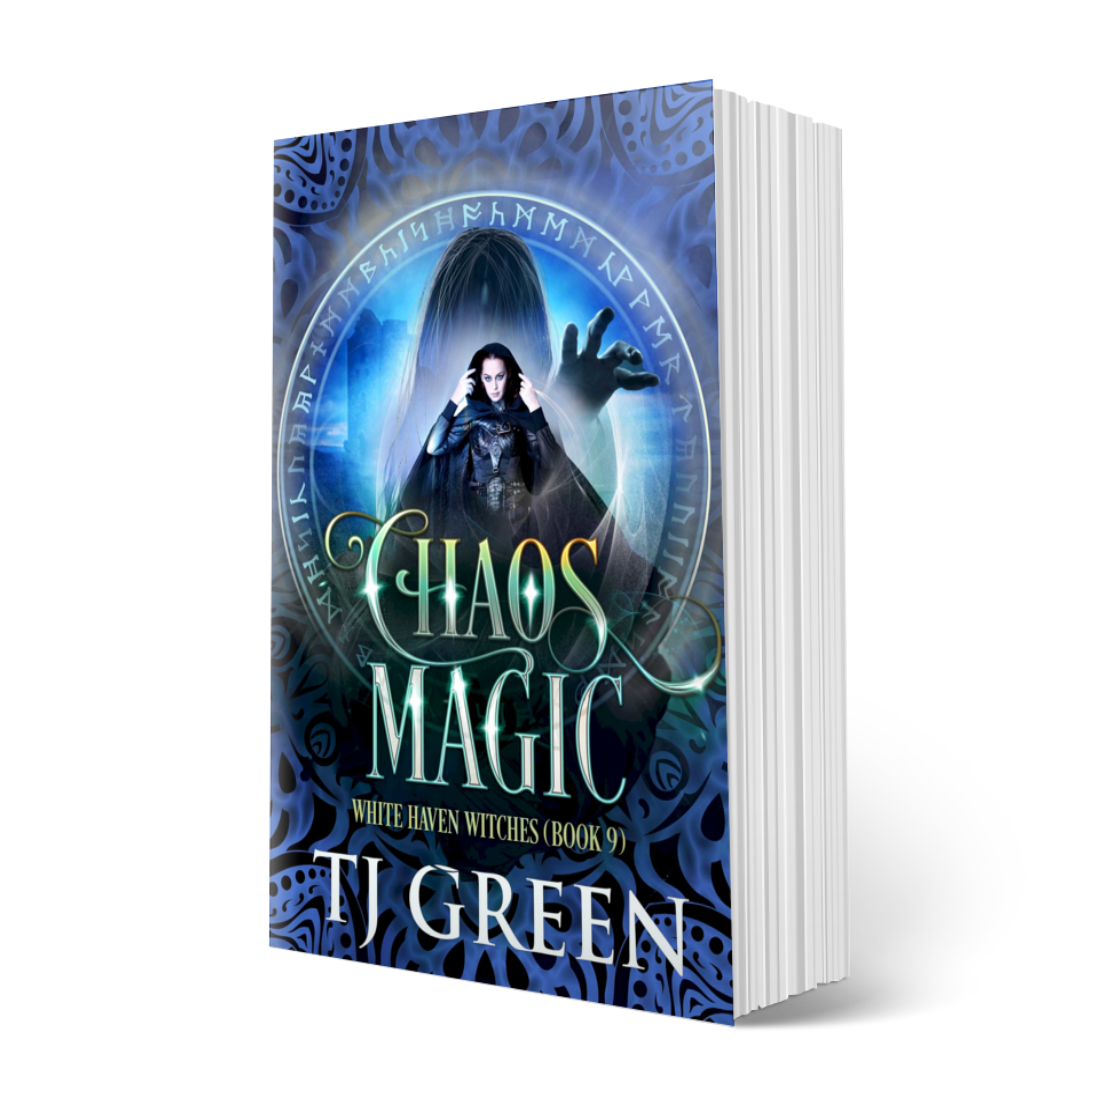 Chaos Magic, paperback, supernatural mystery, paranormal, occult fiction, witch fiction